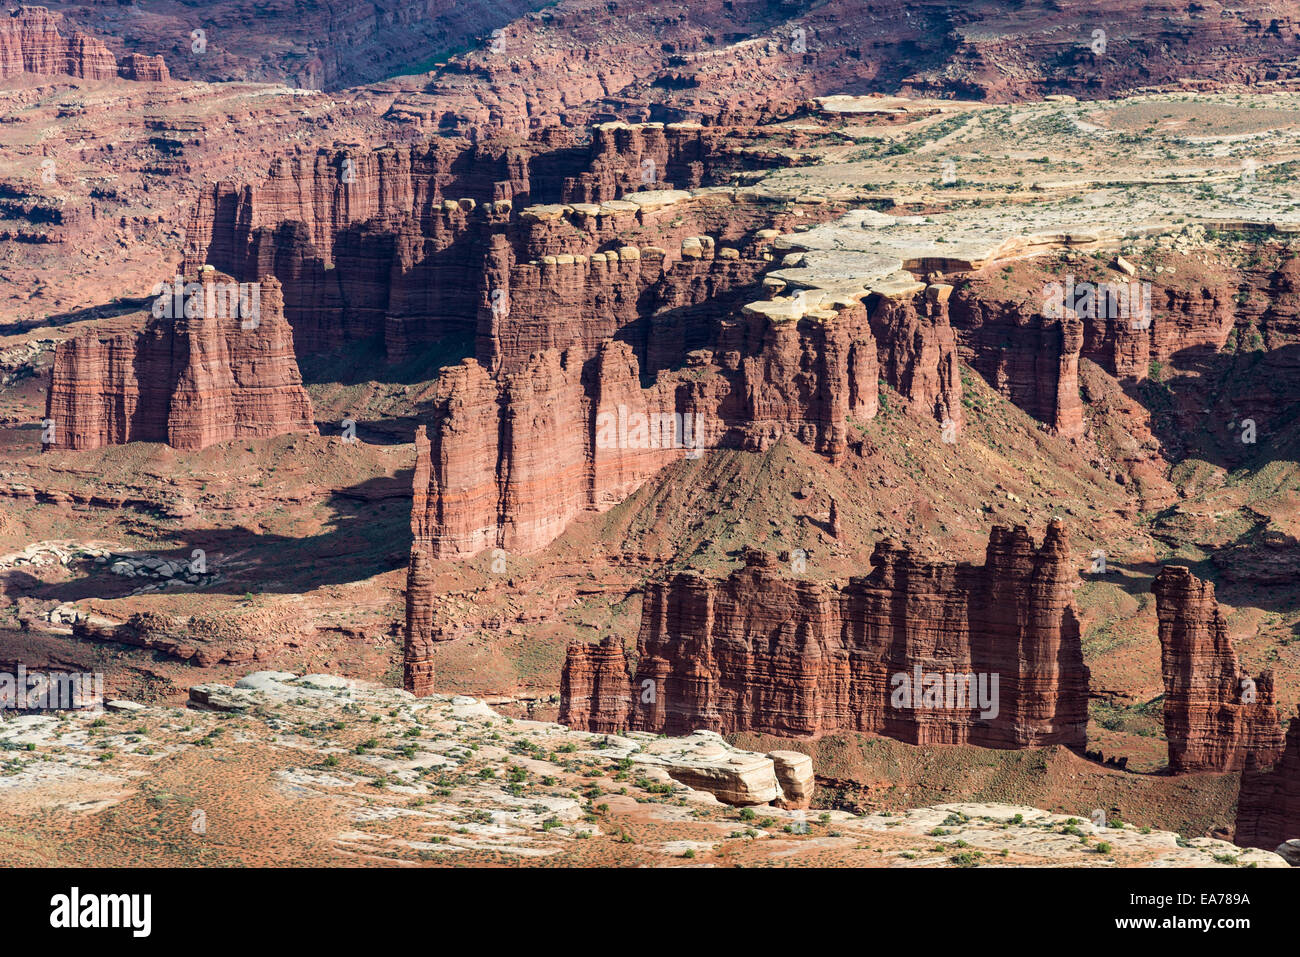 Canyons eroded from sandstone at the Island in the Sky. The Canyonlands National Park, Utah, USA. Stock Photo